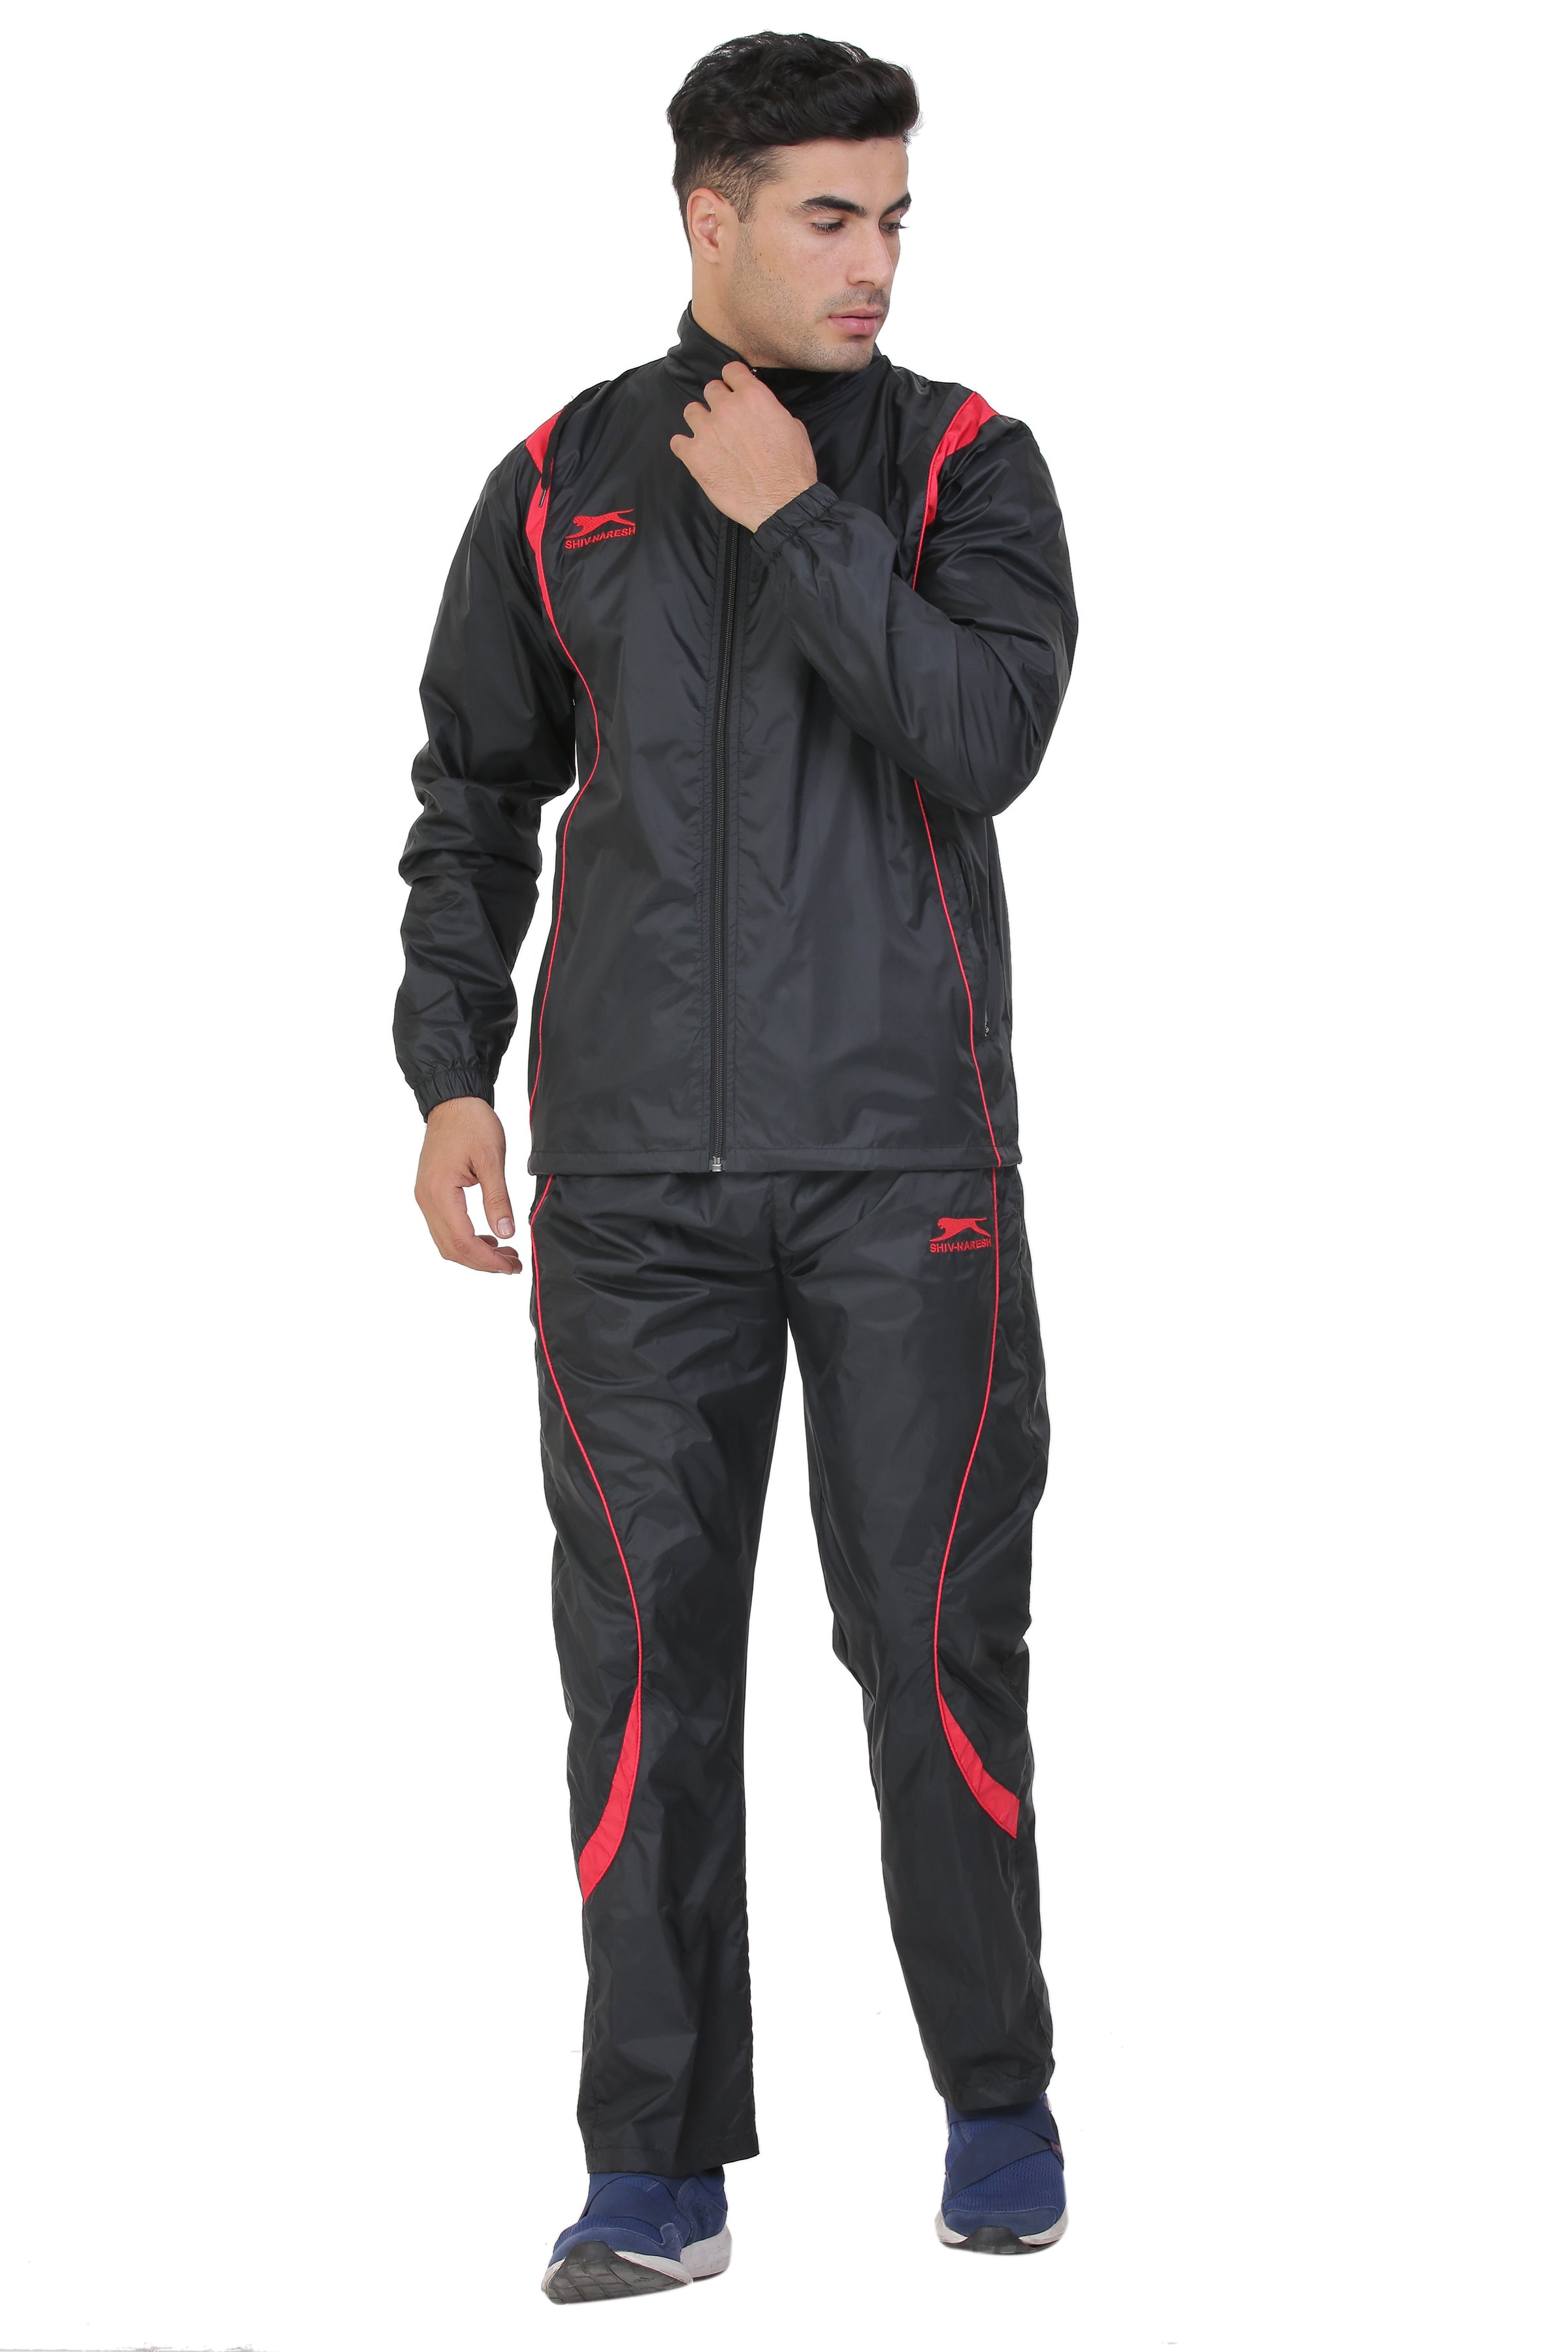 Shiv Naresh Commonwealth Track Suit Multi-Color Unisex (Small) : Amazon.in:  Clothing & Accessories